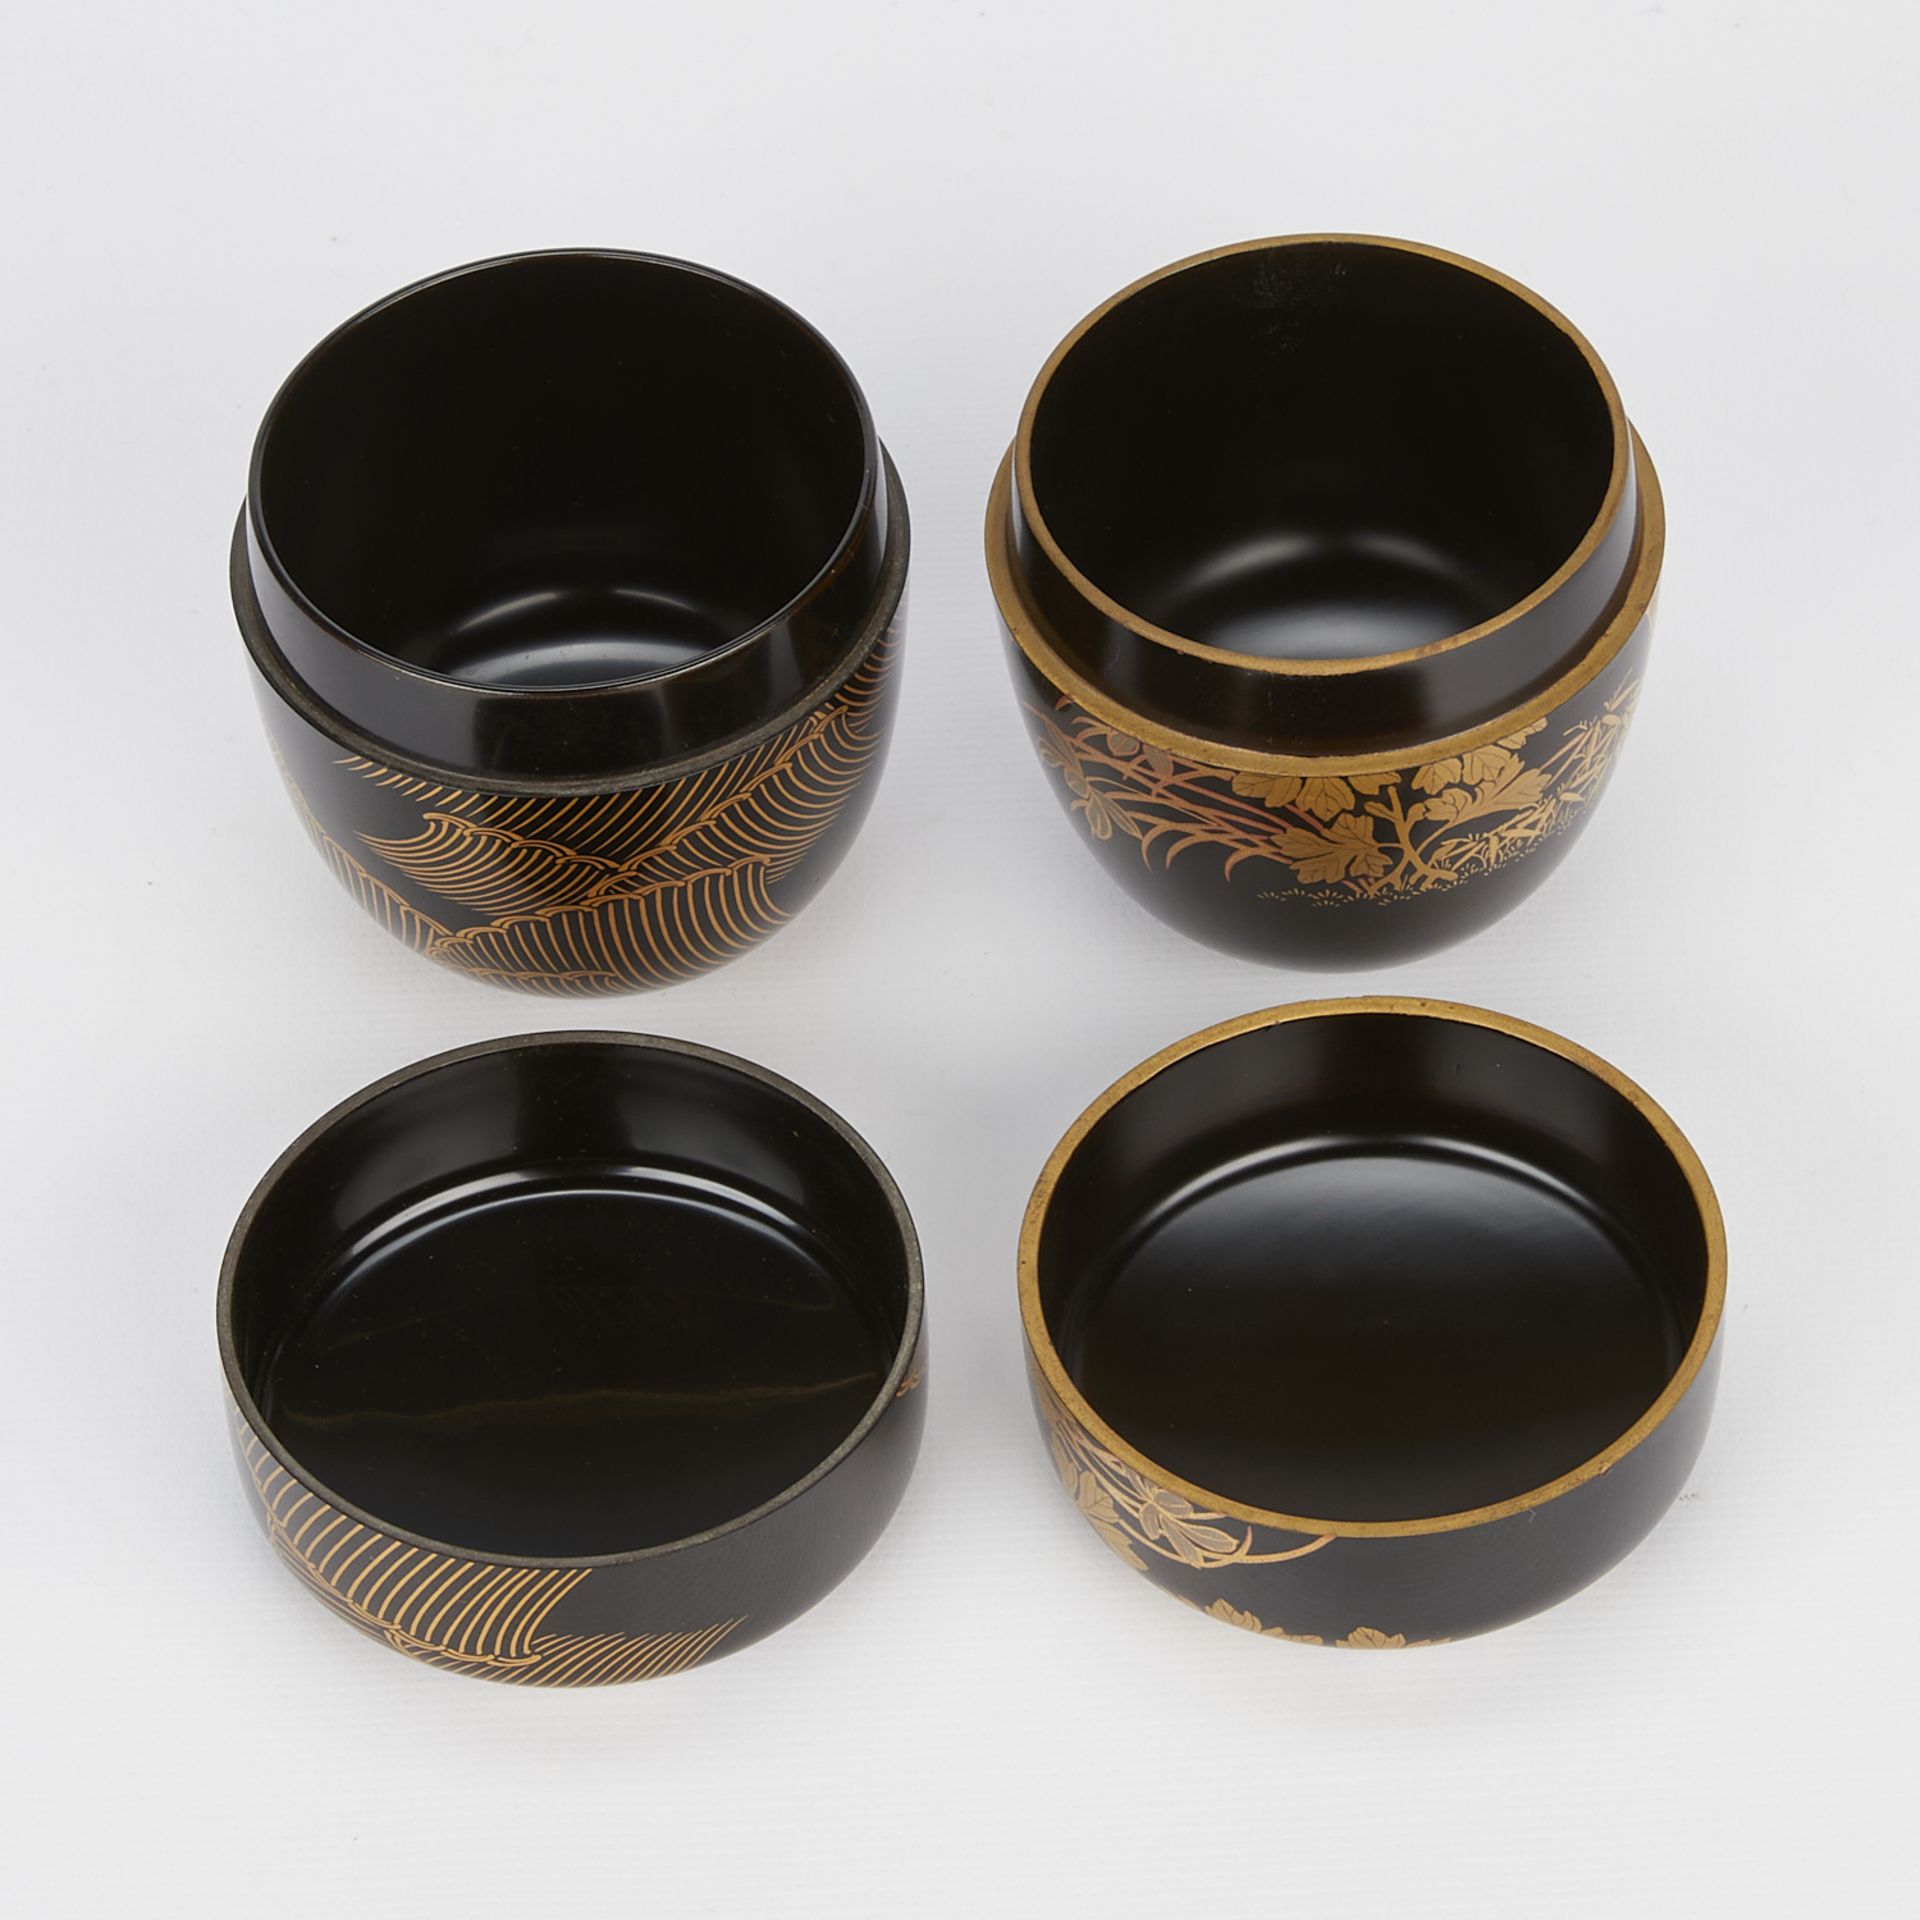 2 Japanese Natsume Tea Caddies in Boxes - Image 9 of 16